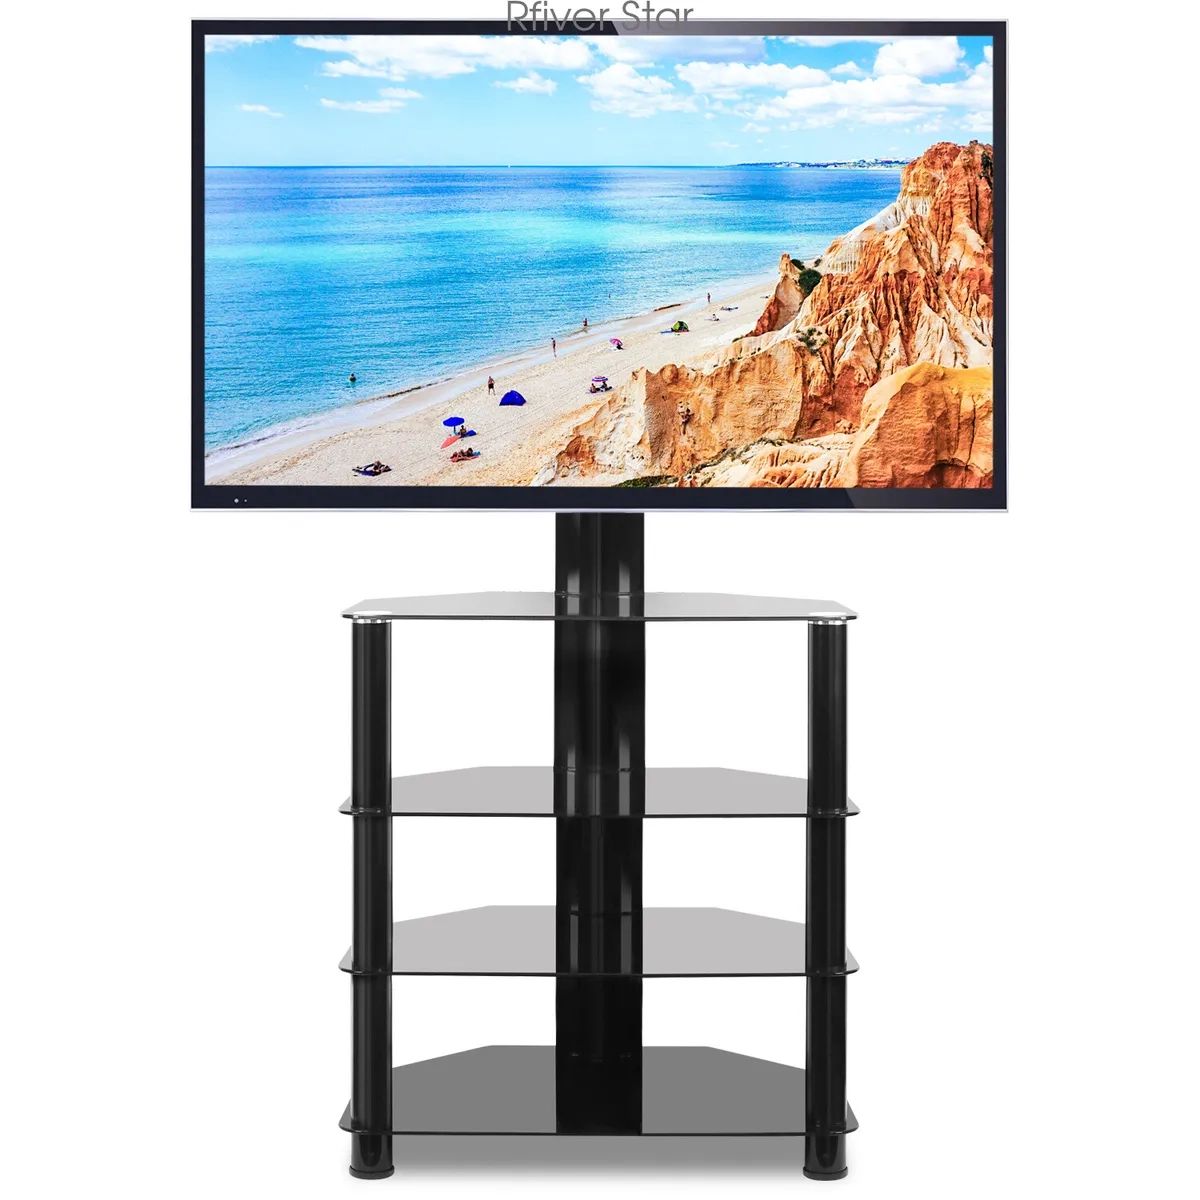 Universal Floor Tv Stand With Swivel Mount And 4 Shelves For 32" 55" Tvs |  Ebay Pertaining To Universal Floor Tv Stands (View 3 of 15)